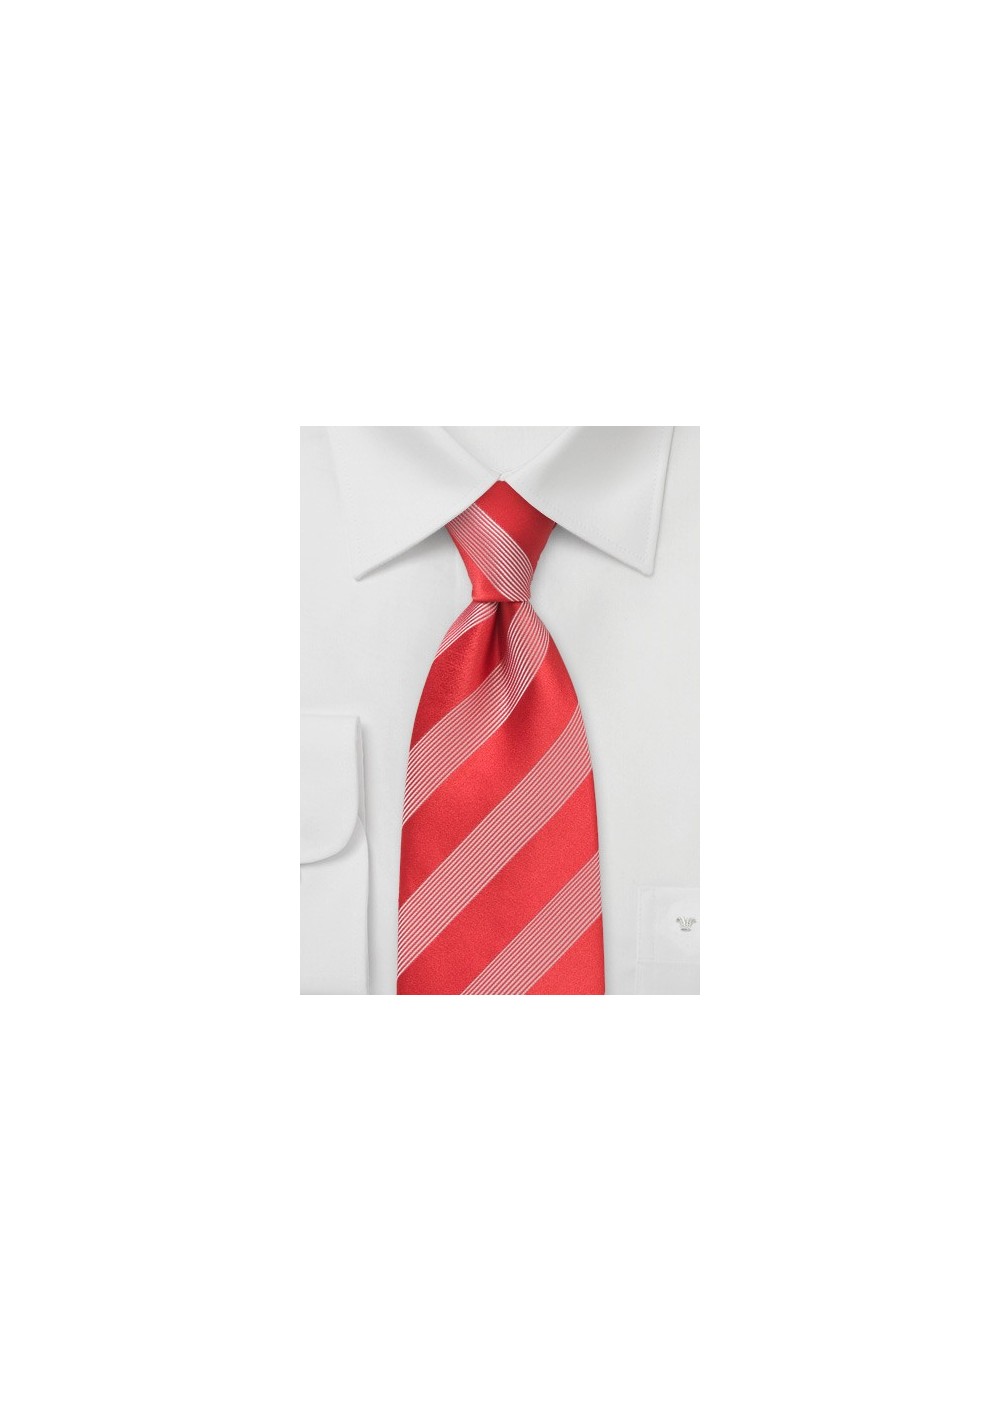 Bright Red Tie with White Stripes